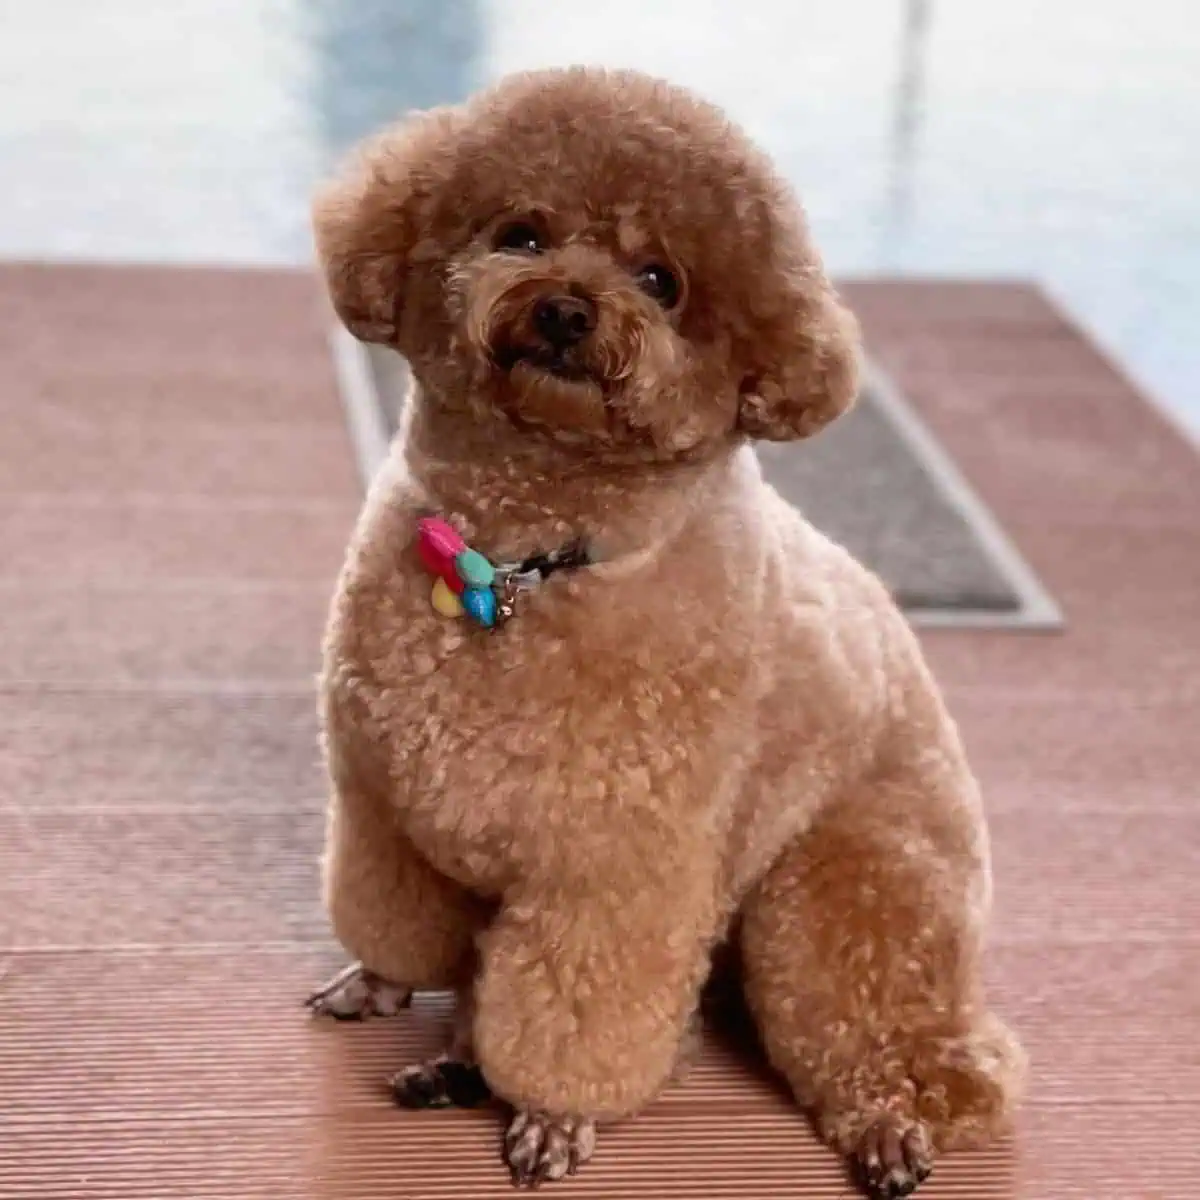 relaxed and happy Toy Poodle